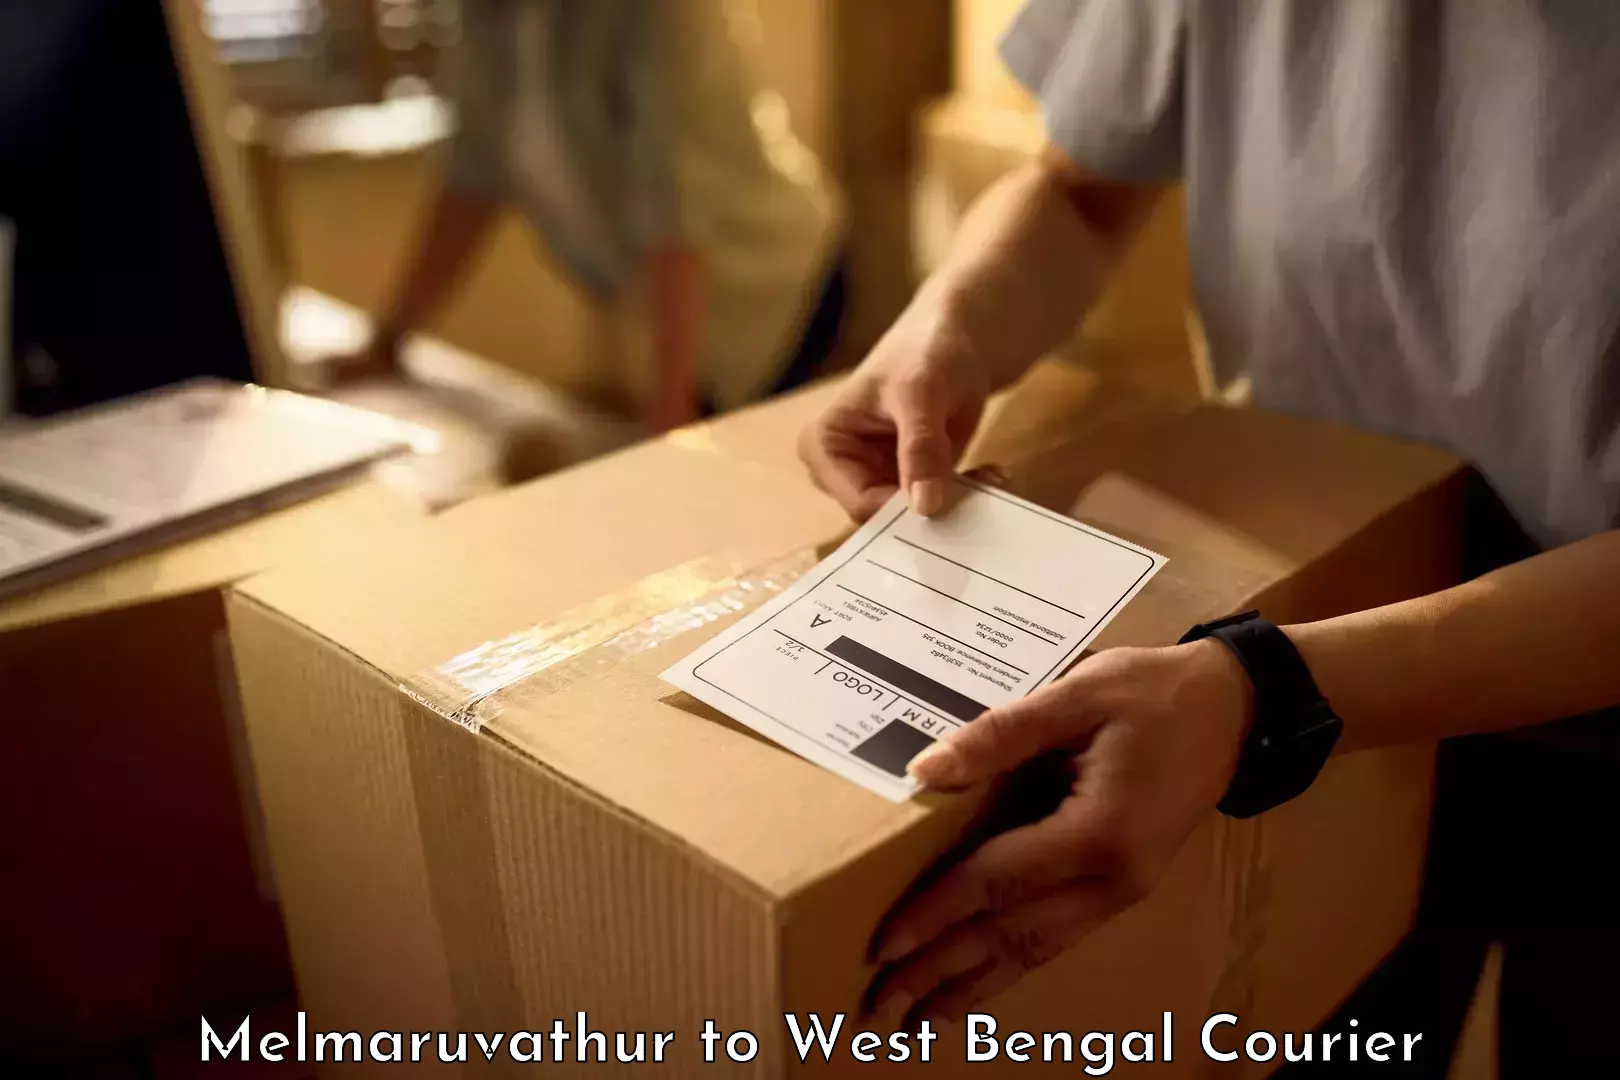 Personal effects shipping Melmaruvathur to West Bengal